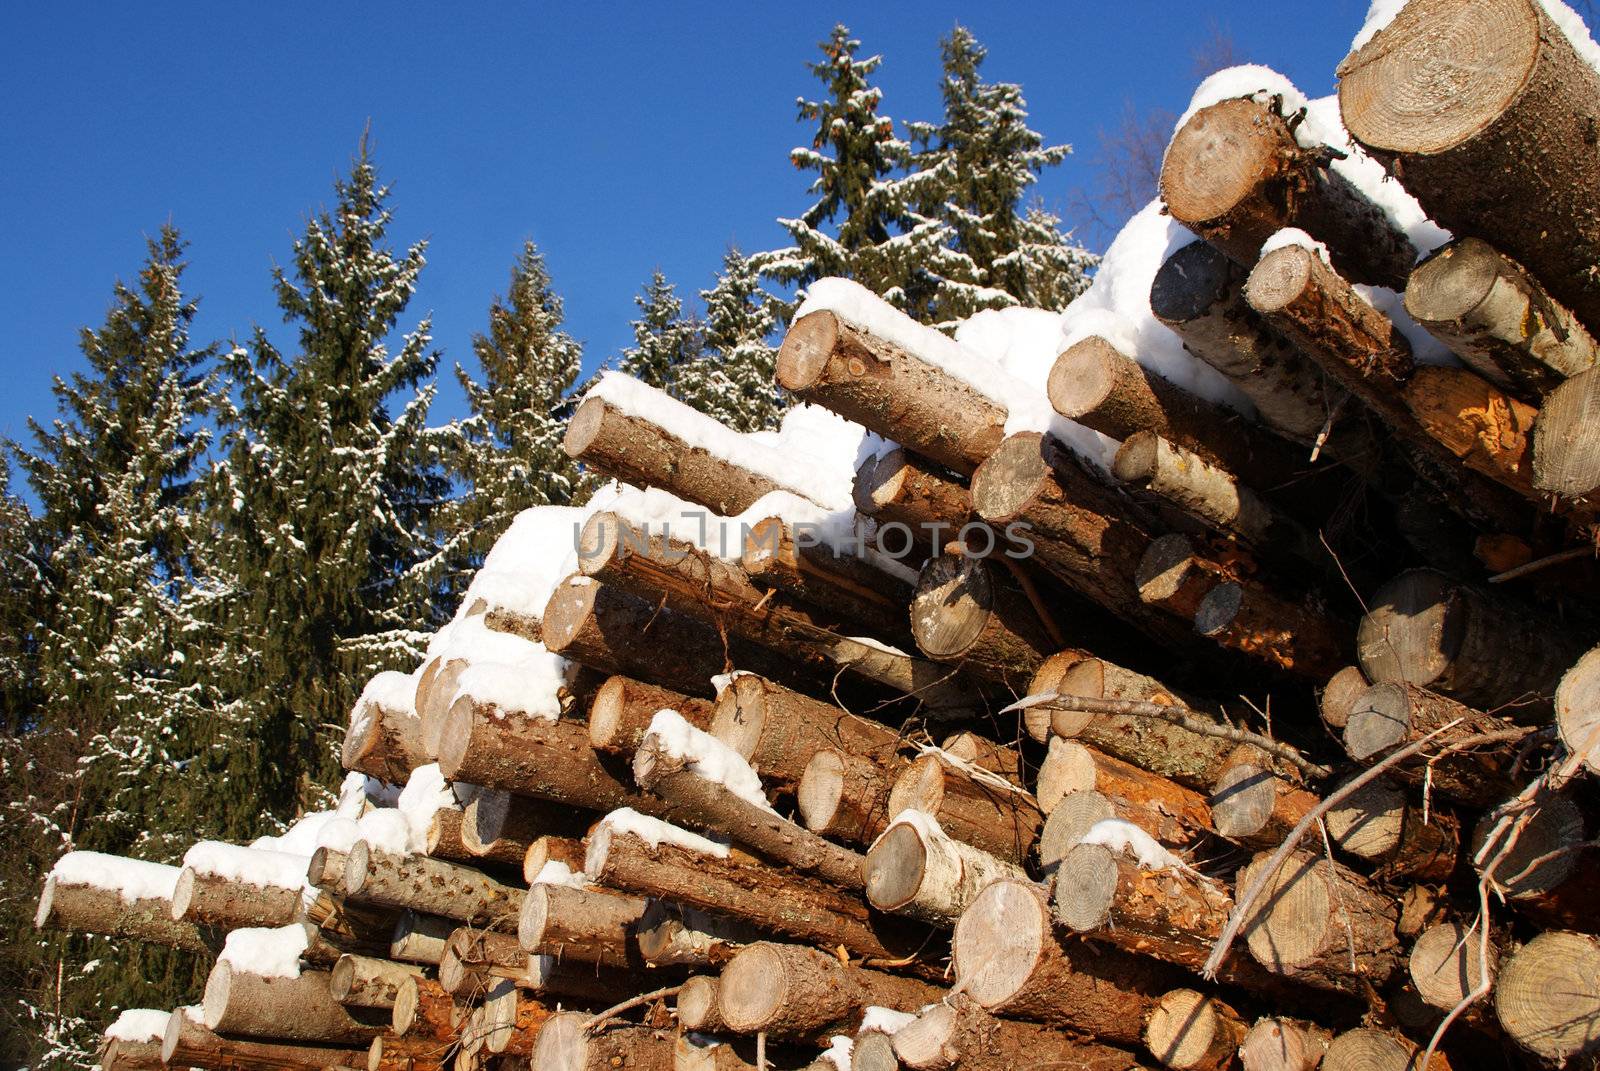 A stack of pine and spruce logs under snow, with tall spruce trees and bright blue sky on the background. Photographed in Salo, Finland in January 2011.